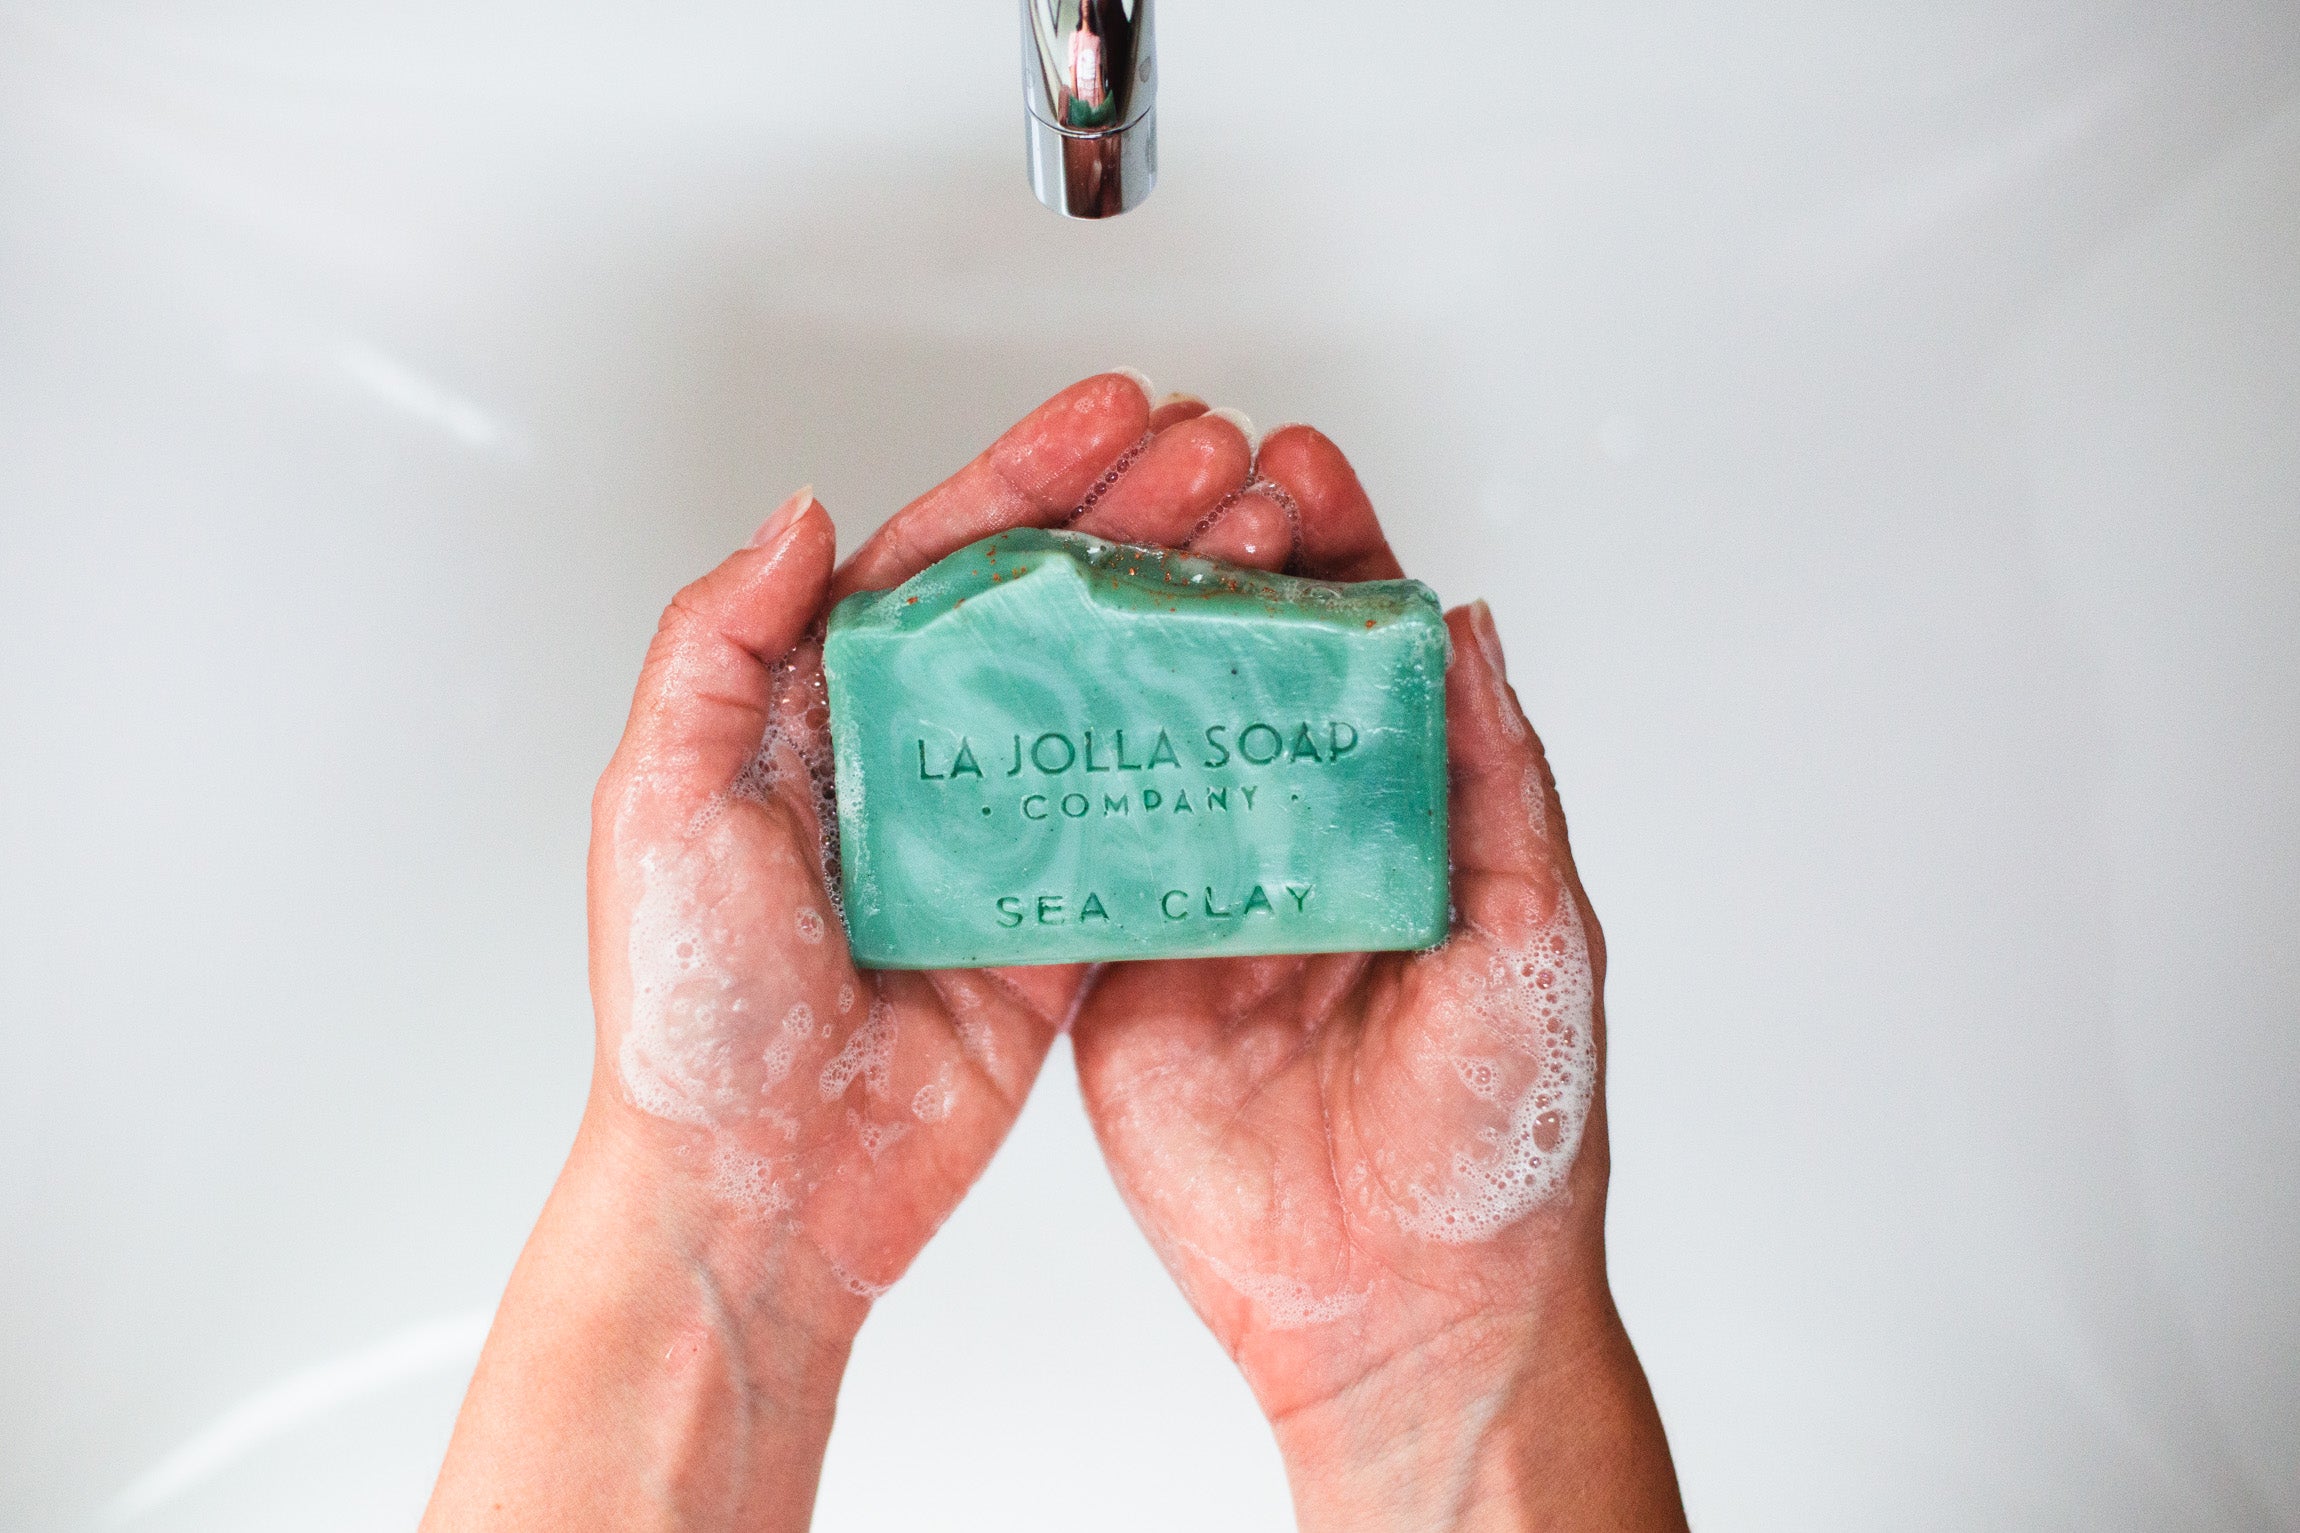 At La Jolla Soap Company our soaps are made the old-fashioned way, from scratch!  Handcrafted in small batches using a cold process then curing a minimum of 4 to 6 weeks.  Each recipe is unique and comprised of the finest natural ingredients.